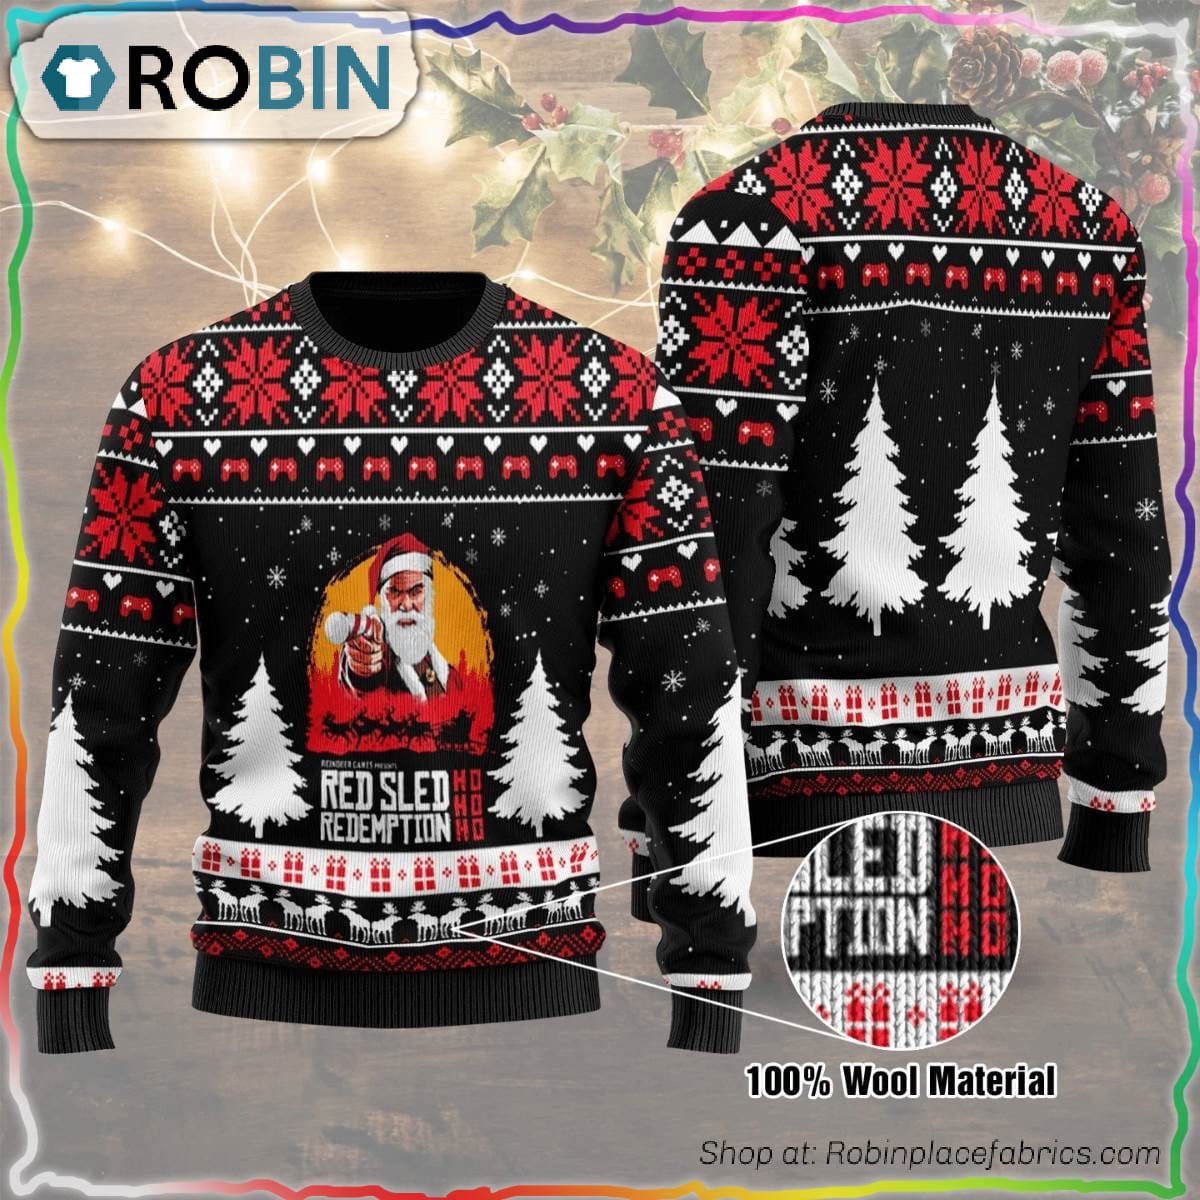 Red Sled Redemption Ugly Christmas Sweater - RobinPlaceFabrics